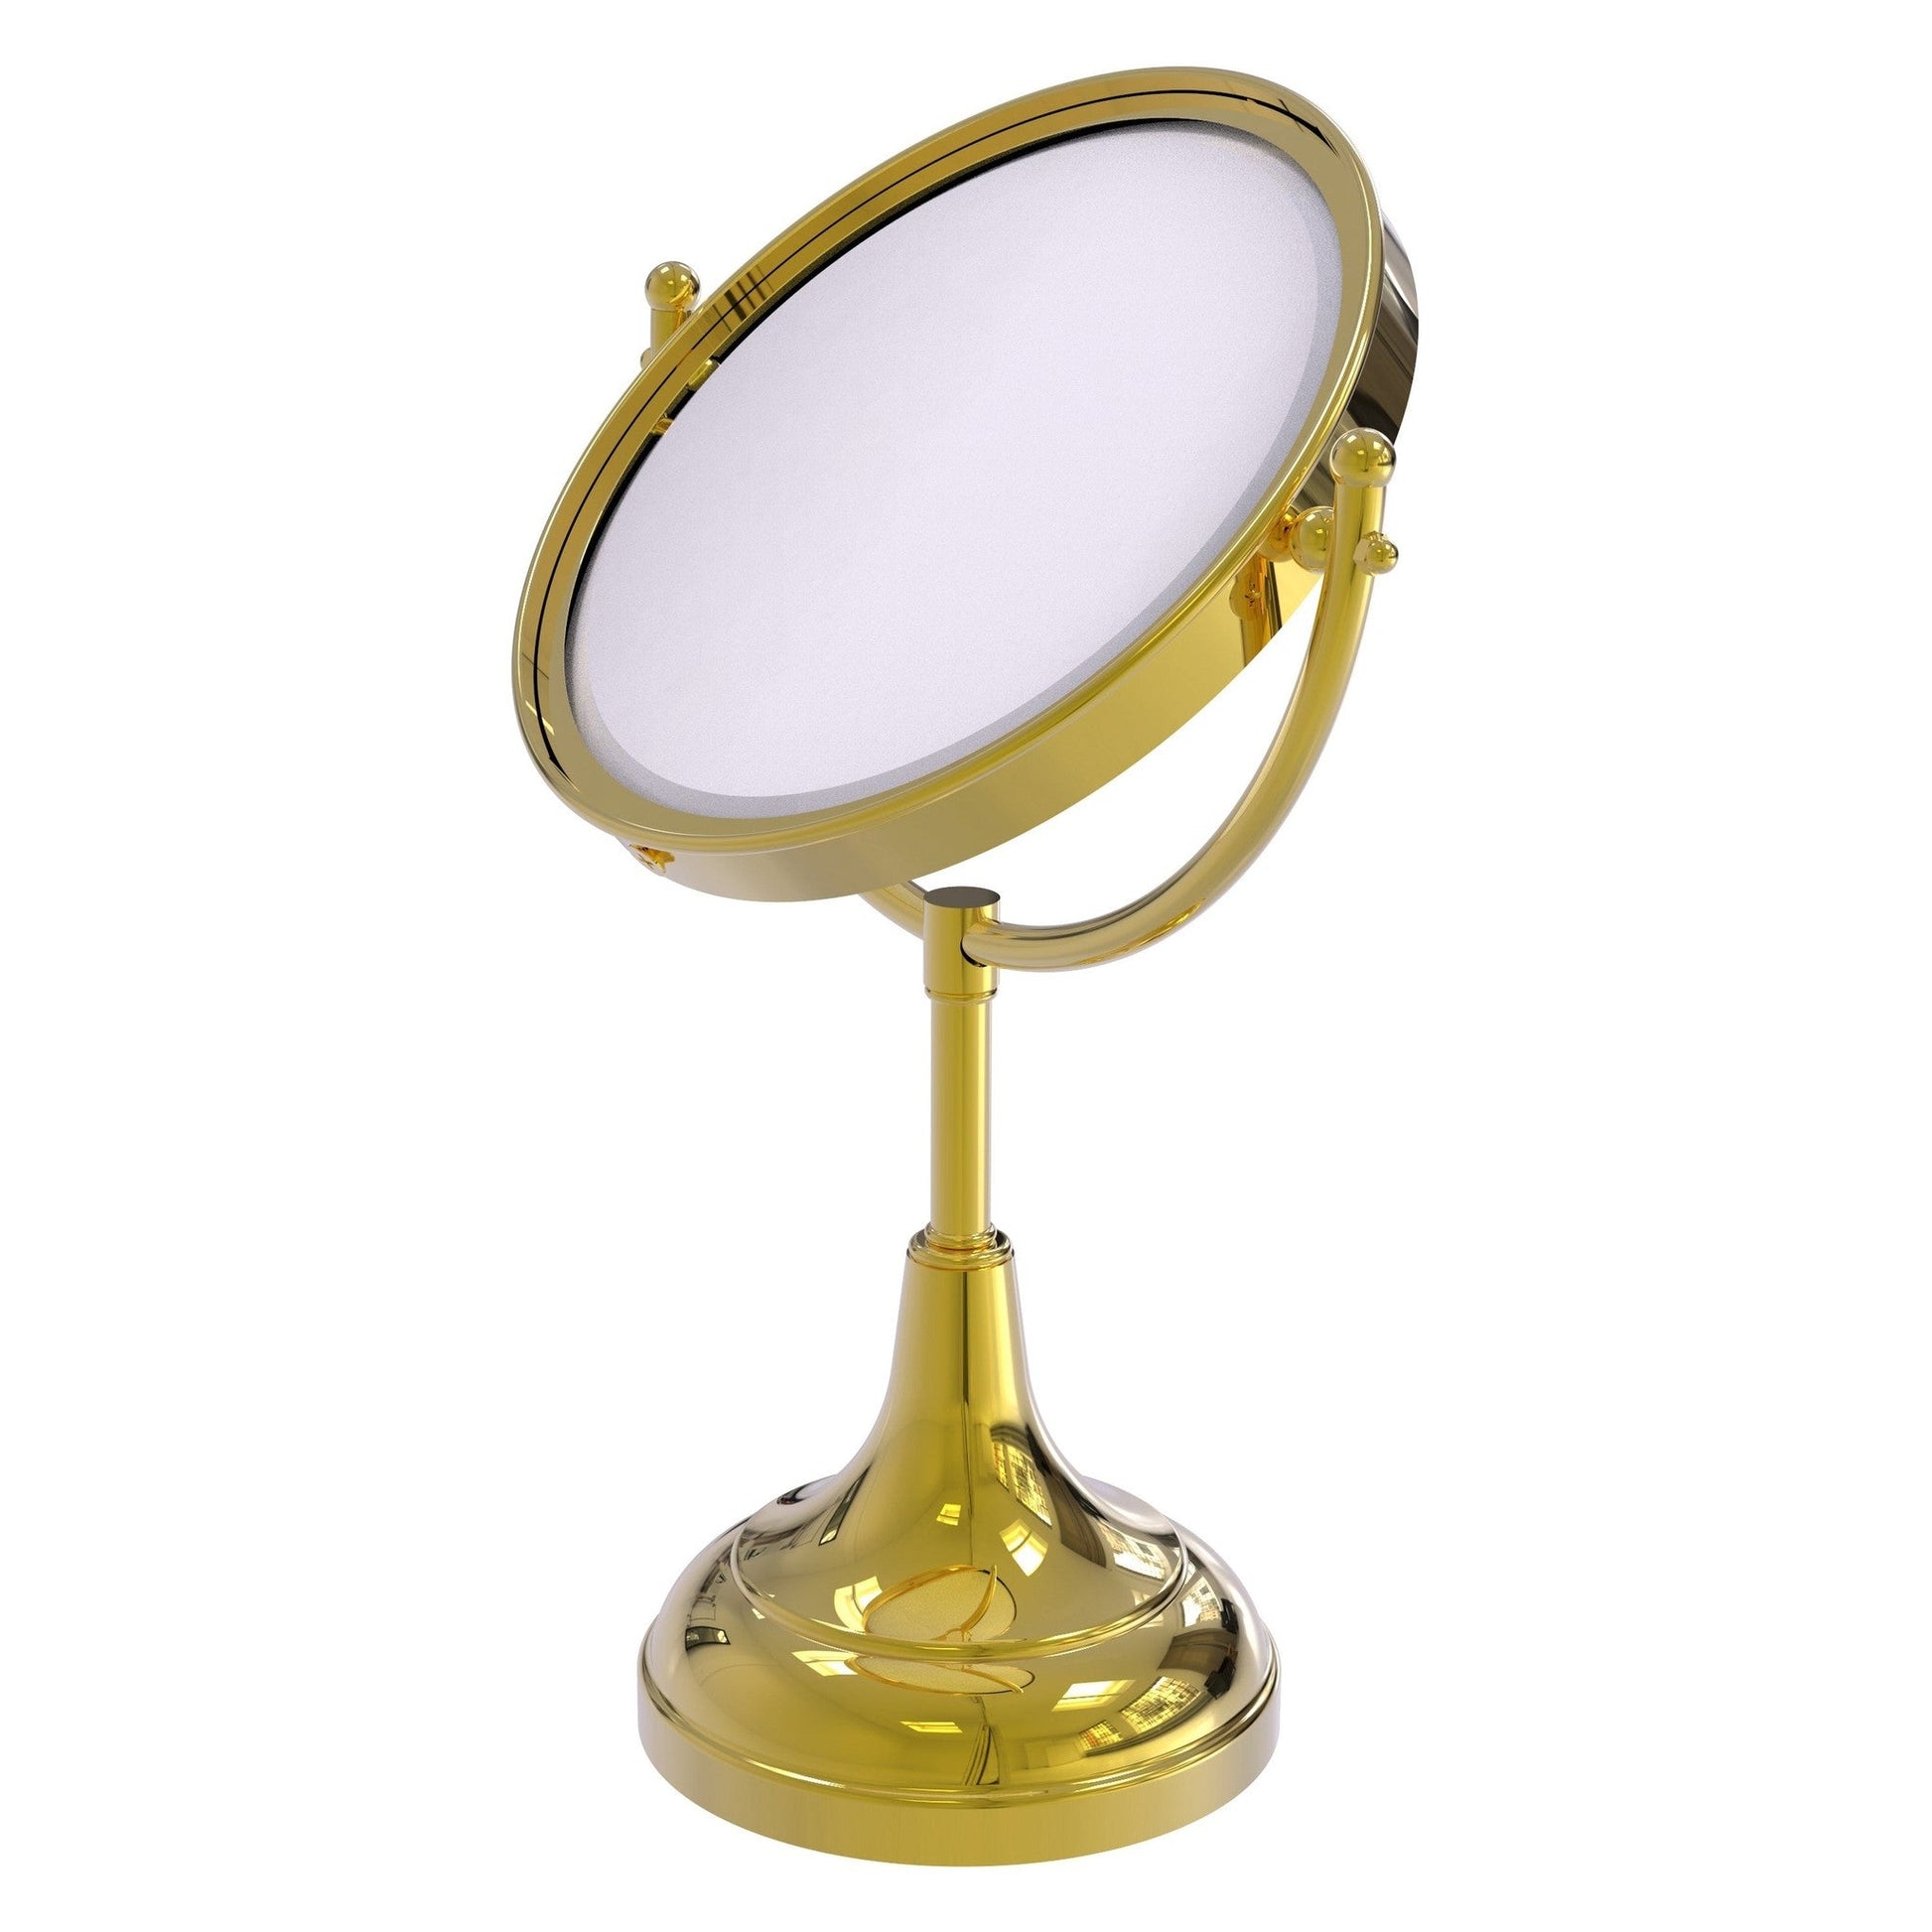 Allied Brass DM-2/4X 8" x 8" Polished Brass Solid Brass Vanity Top Make-Up Mirror 4X Magnification